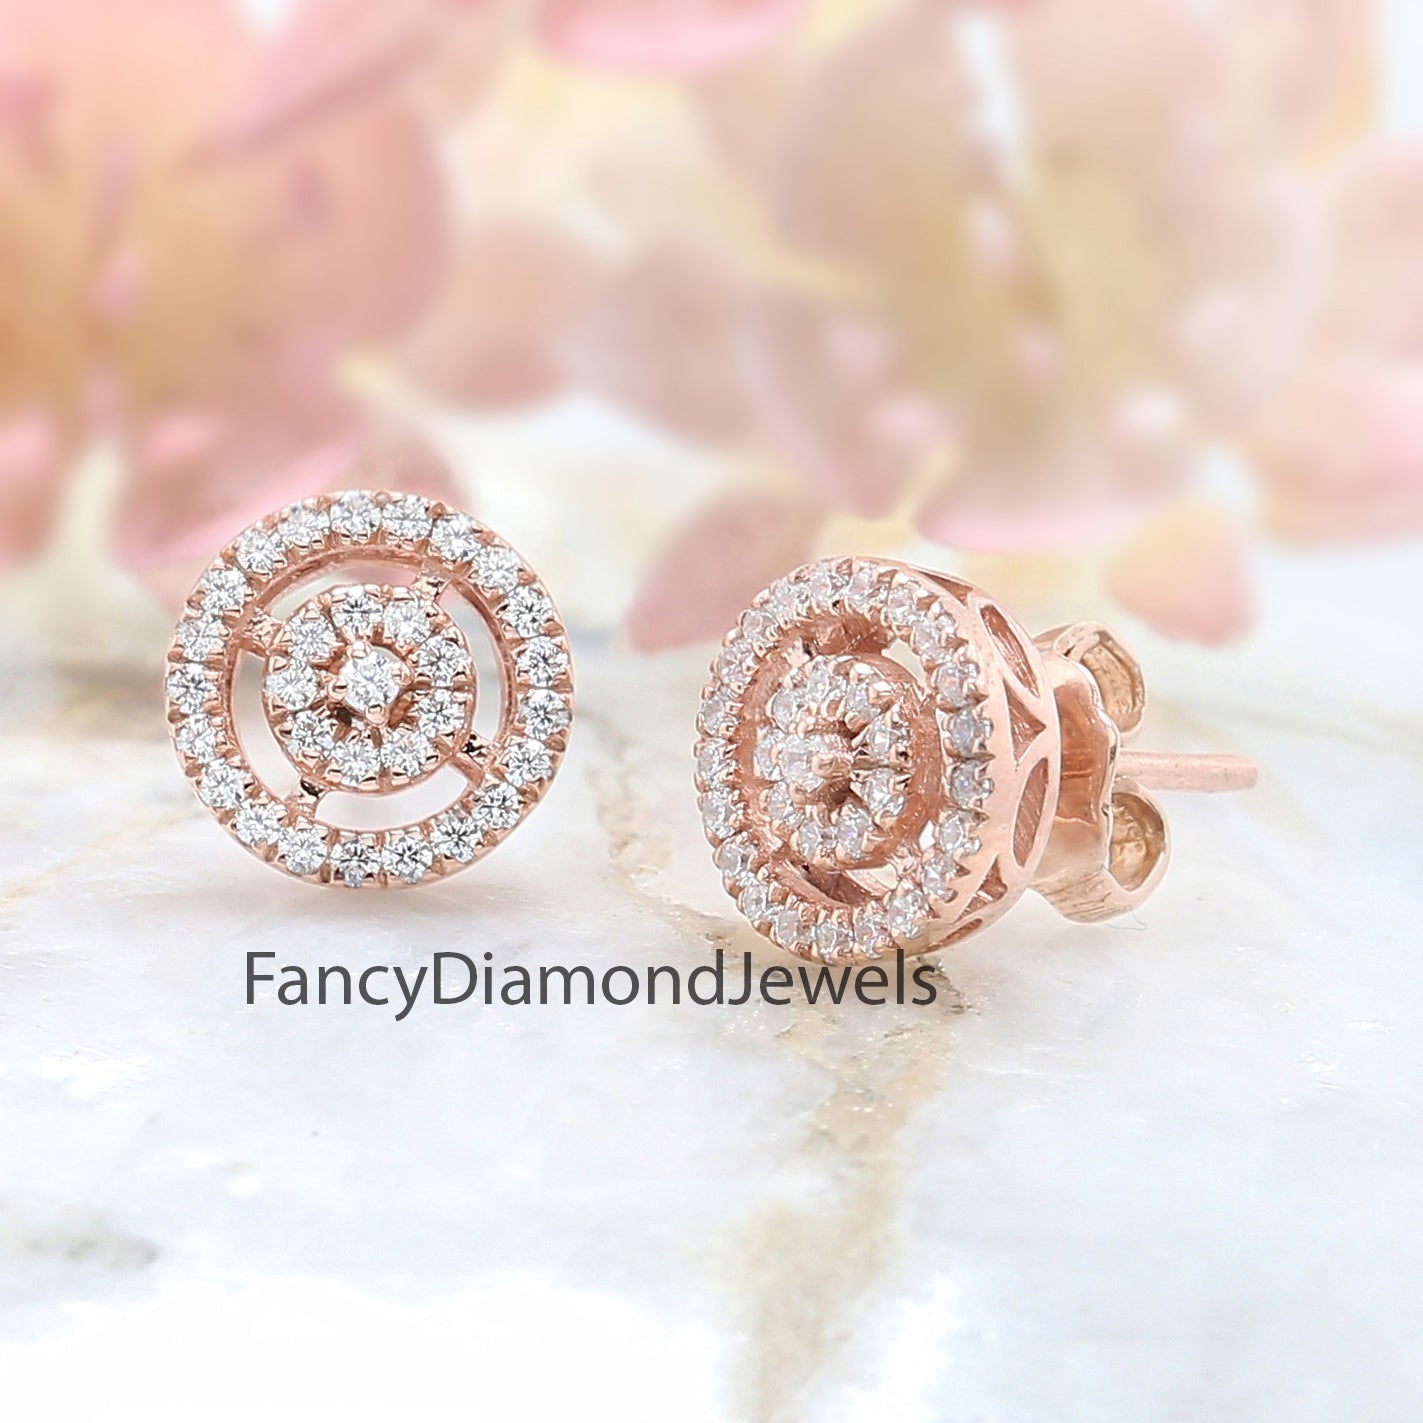 Round White Color Diamond Earring Engagement Wedding Gift Earring 14K Solid Rose White Yellow Gold Earring 0.43 CT KD978